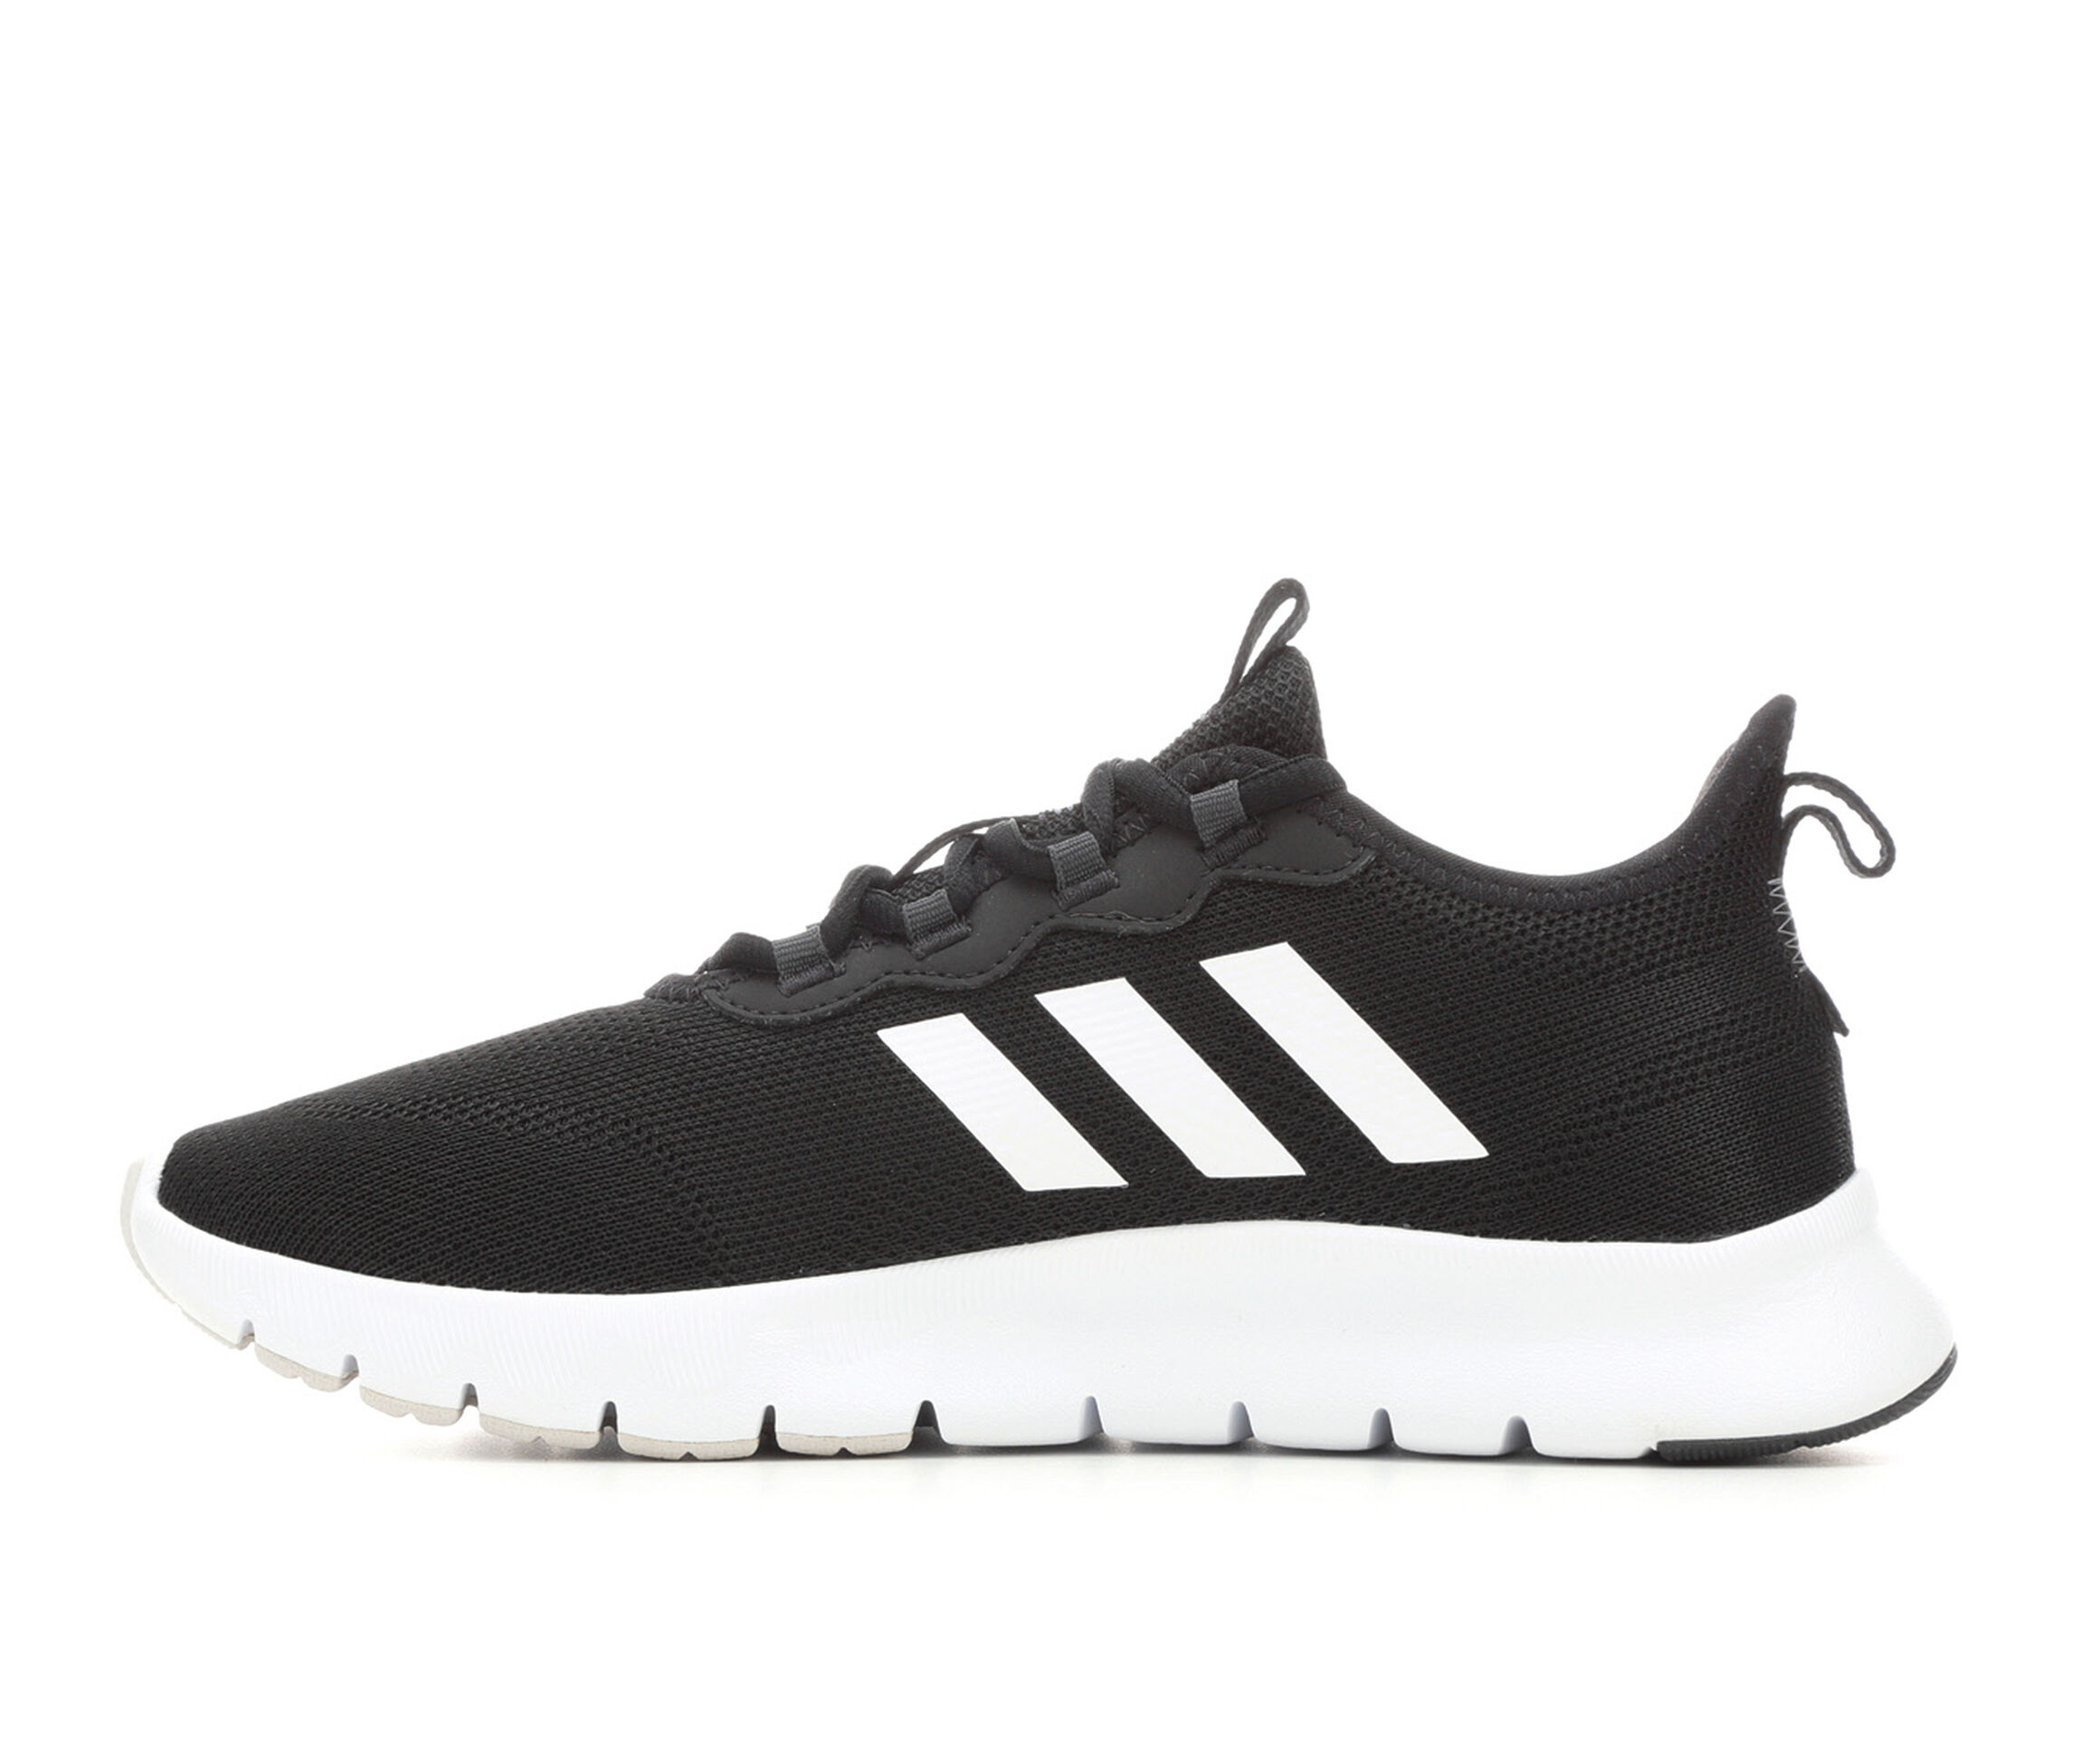 Adidas Sneakers for Women